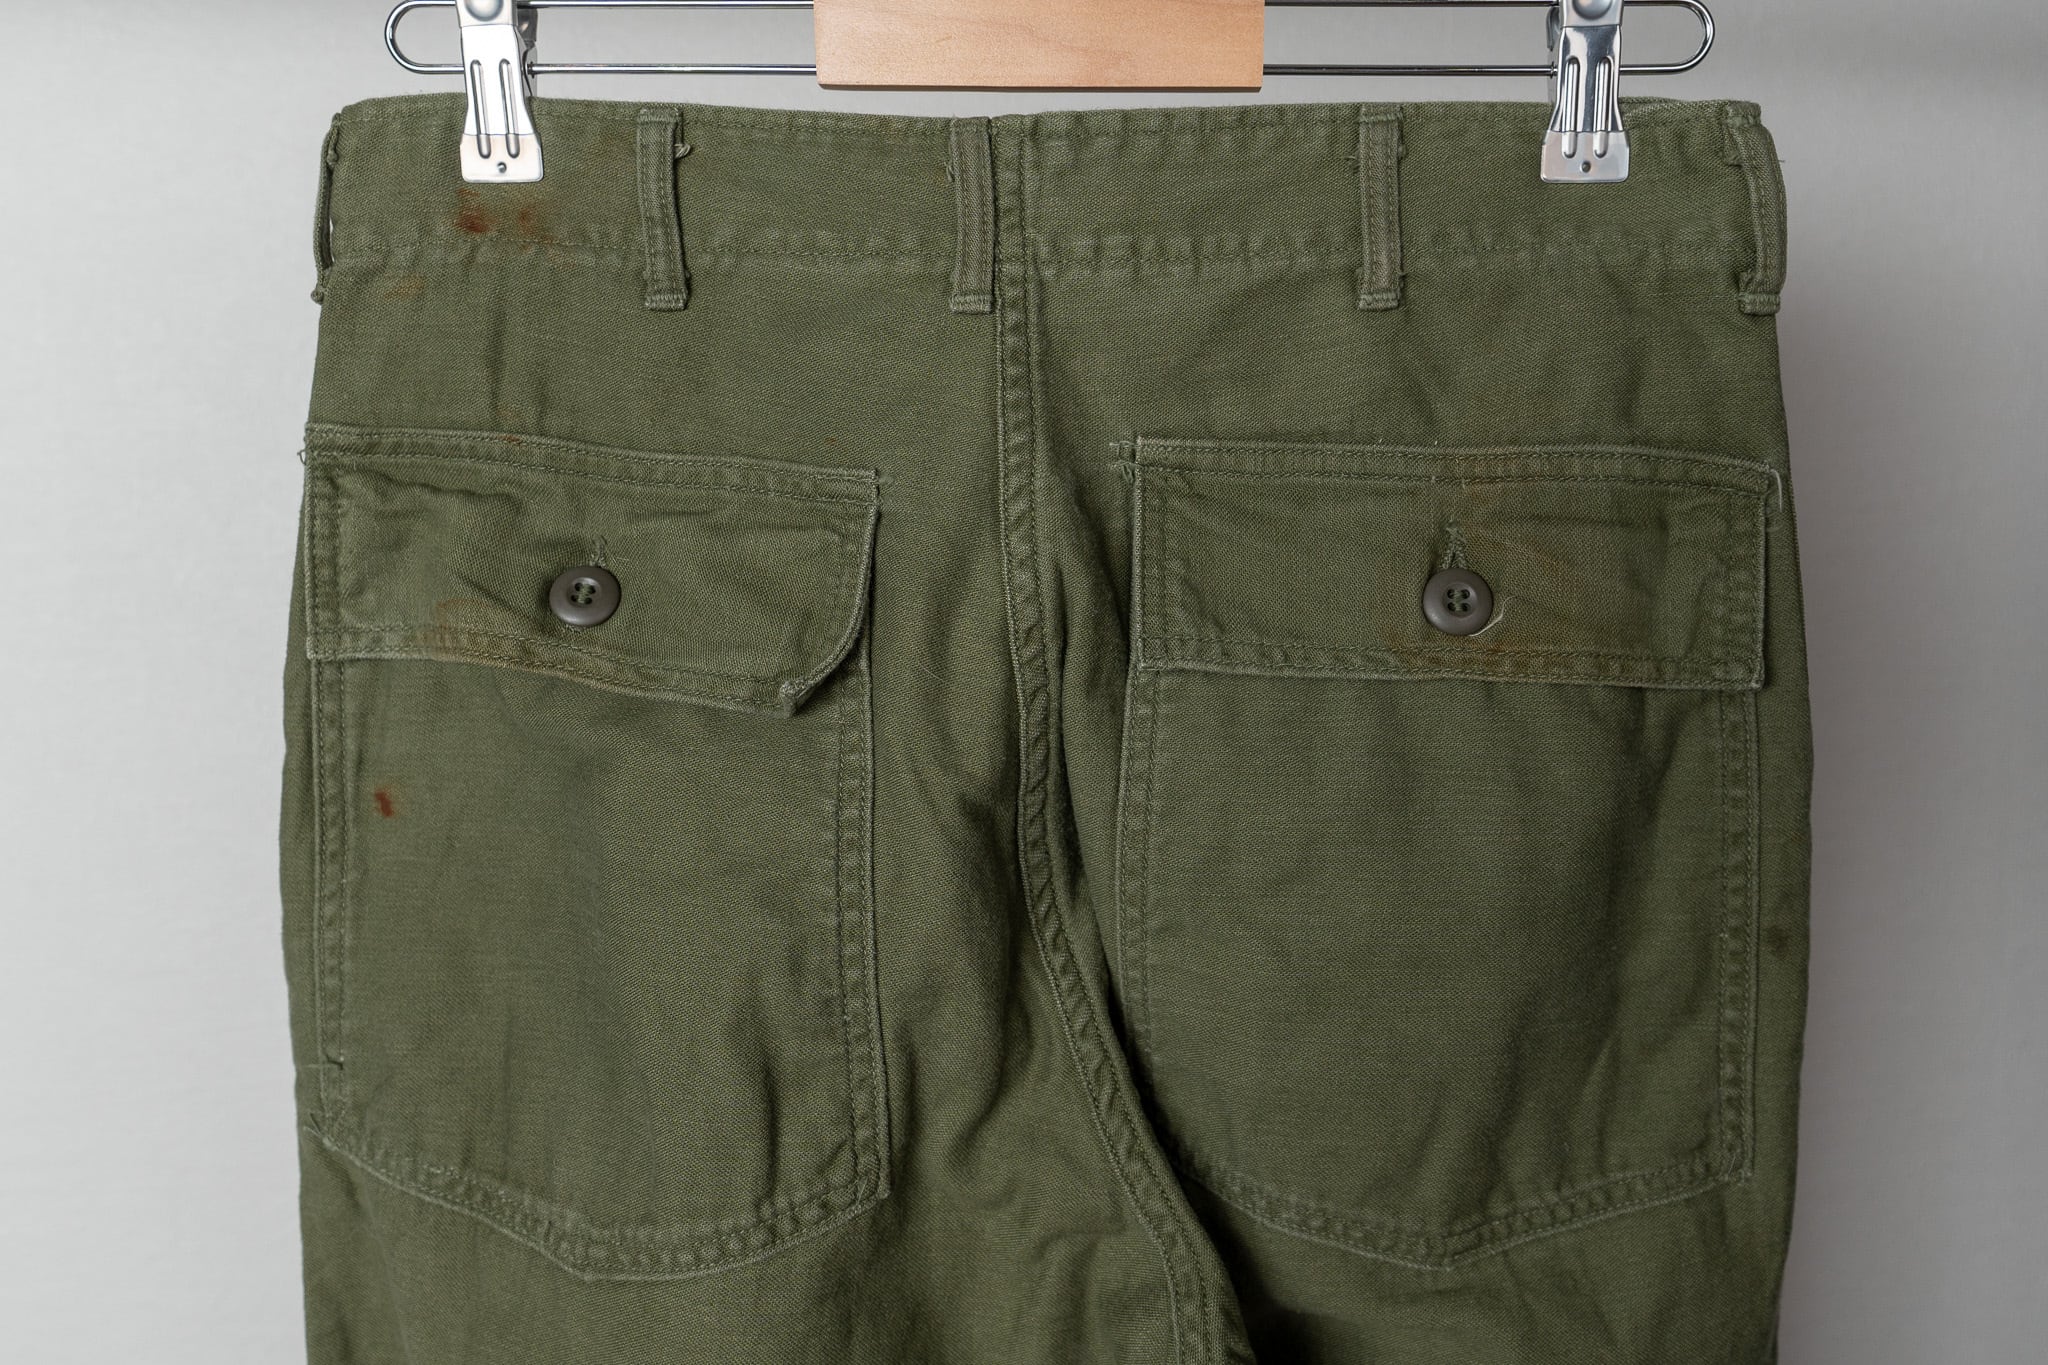 32×31】U.S.Army Utility Trousers OG-107 Used 実物 米軍 ベイカー